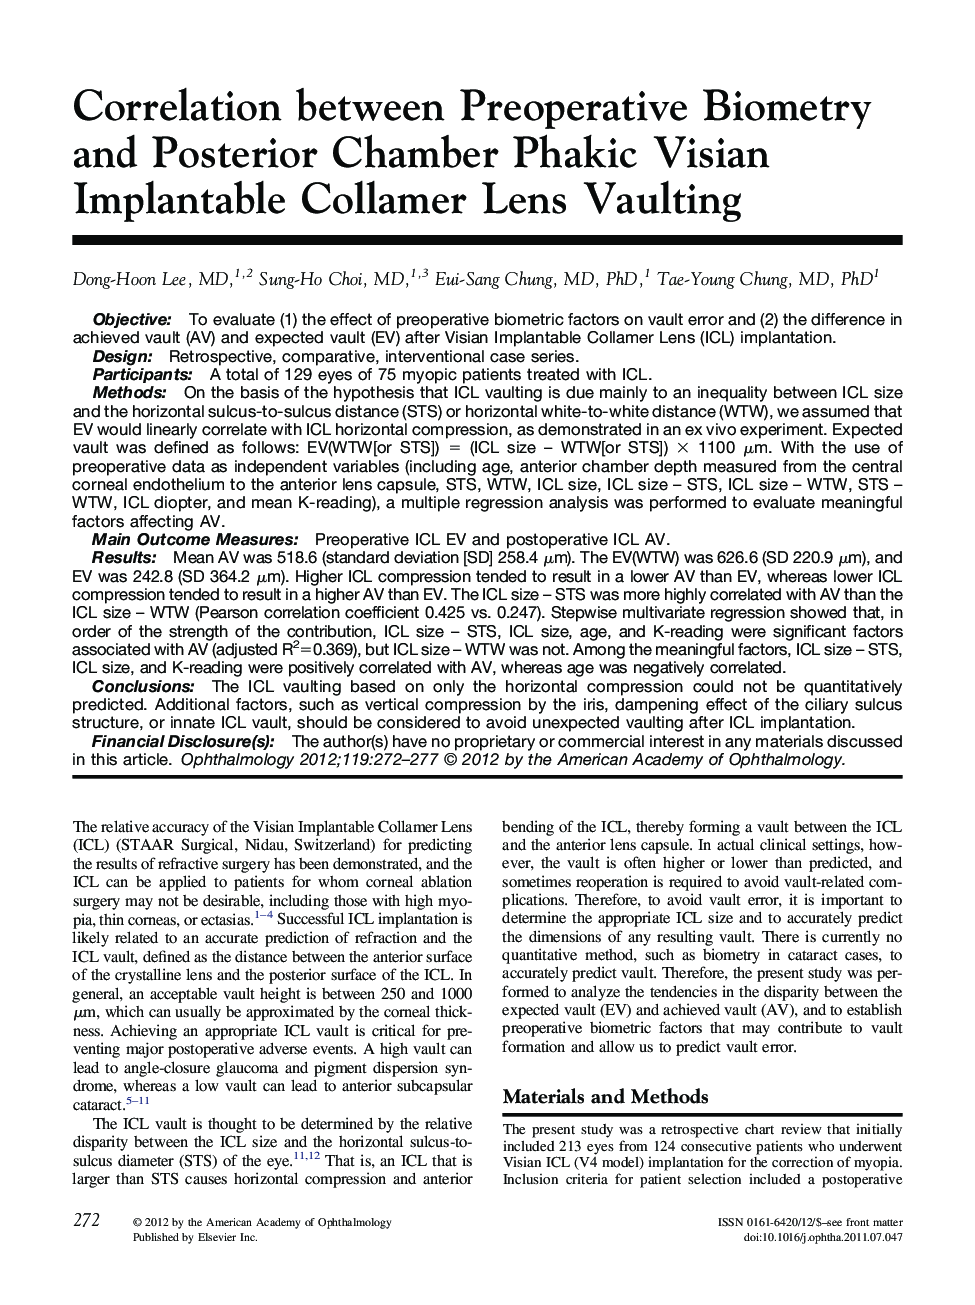 Correlation between Preoperative Biometry and Posterior Chamber Phakic Visian Implantable Collamer Lens Vaulting